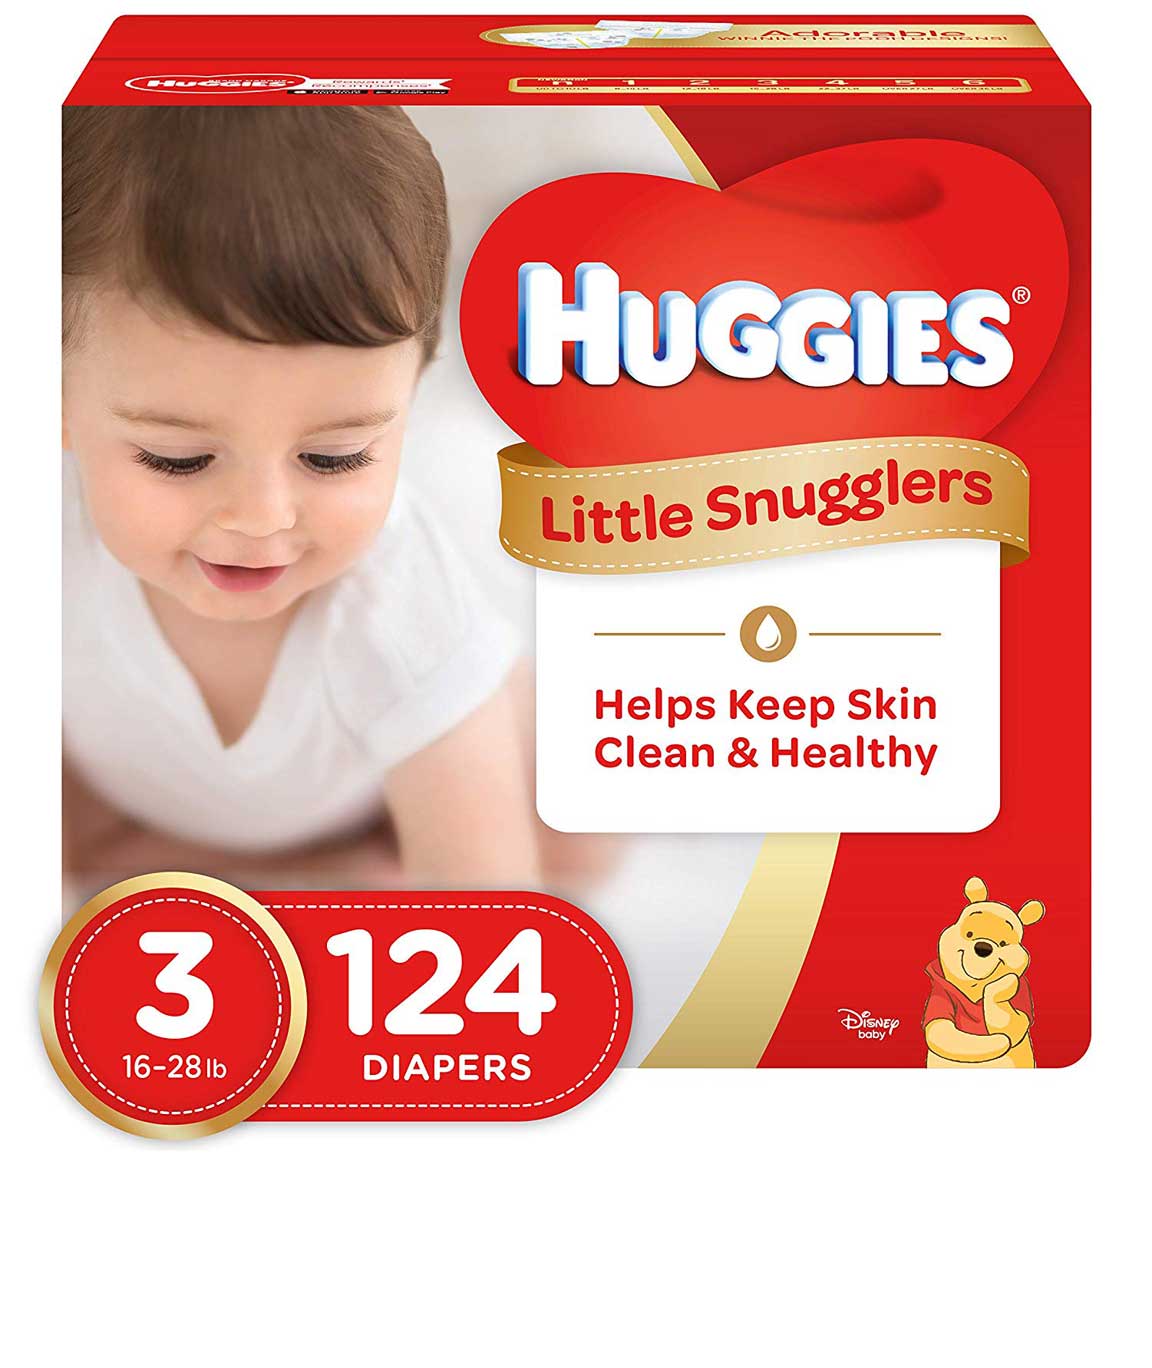 Huggies Little Snugglers Baby Diapers, Size 3, 124 Count (Packaging May Vary)